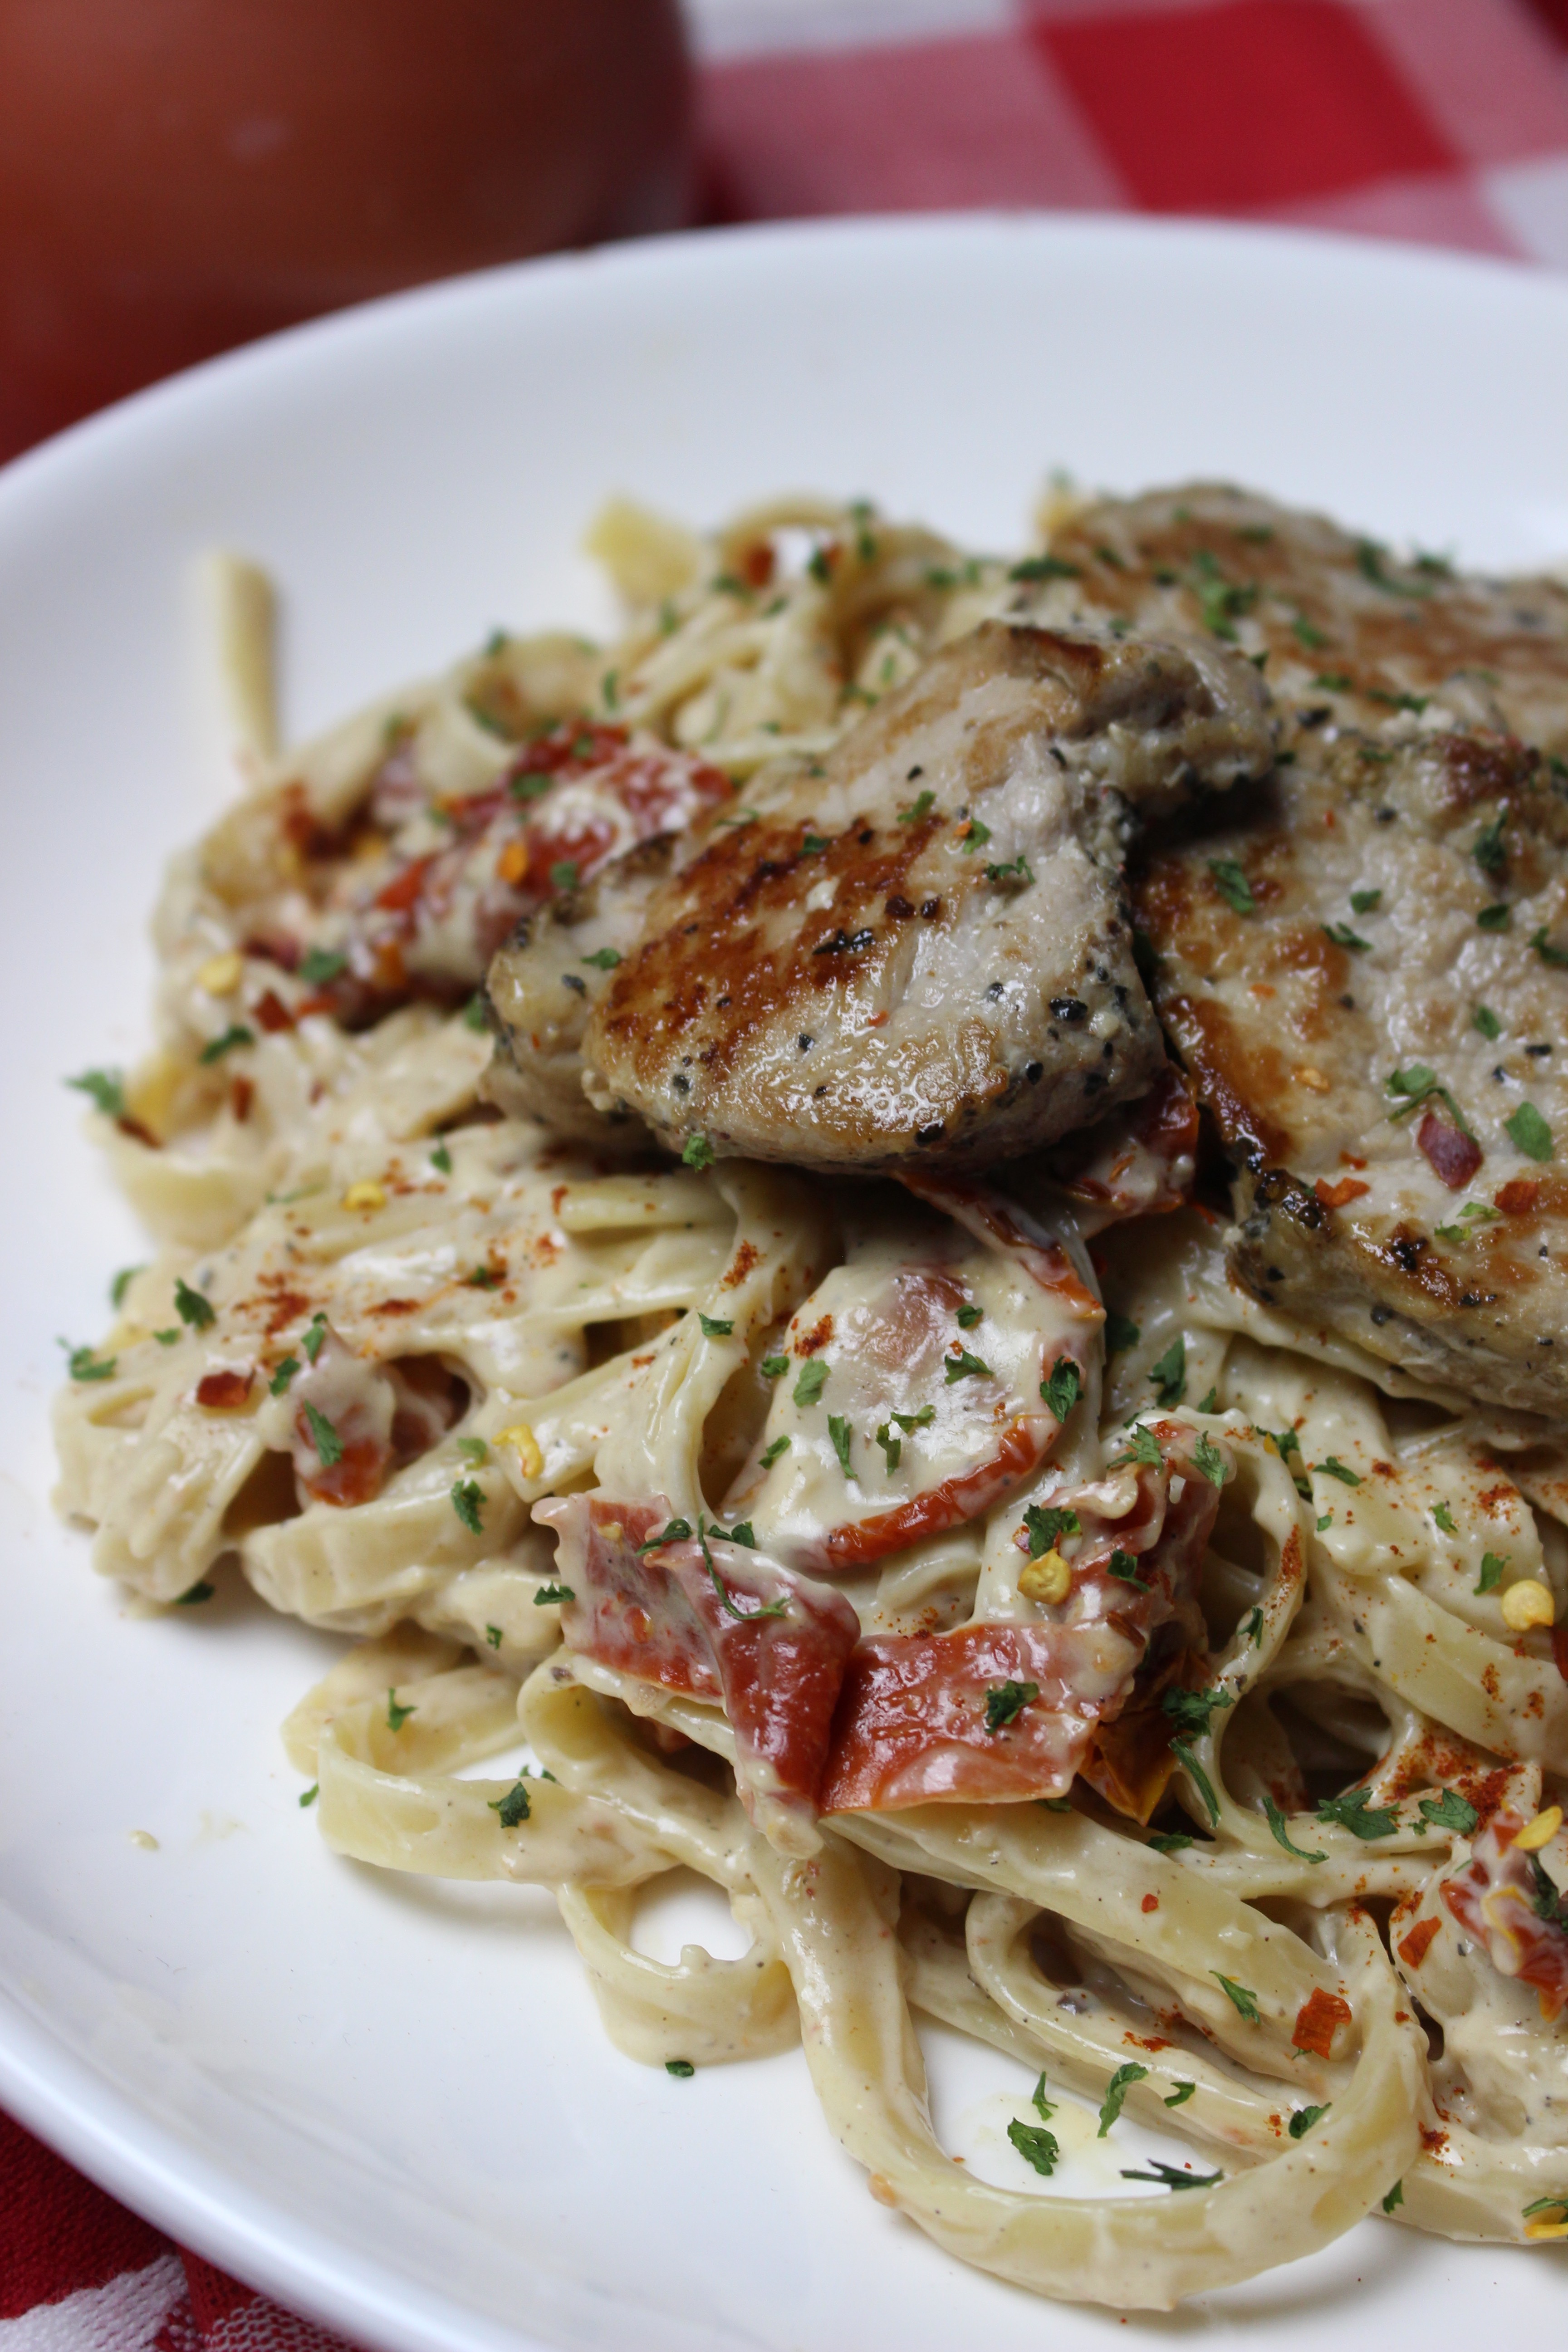 Tart sun-dried tomatoes and tender pork with Alfredo sauce and perfectly cooked pasta